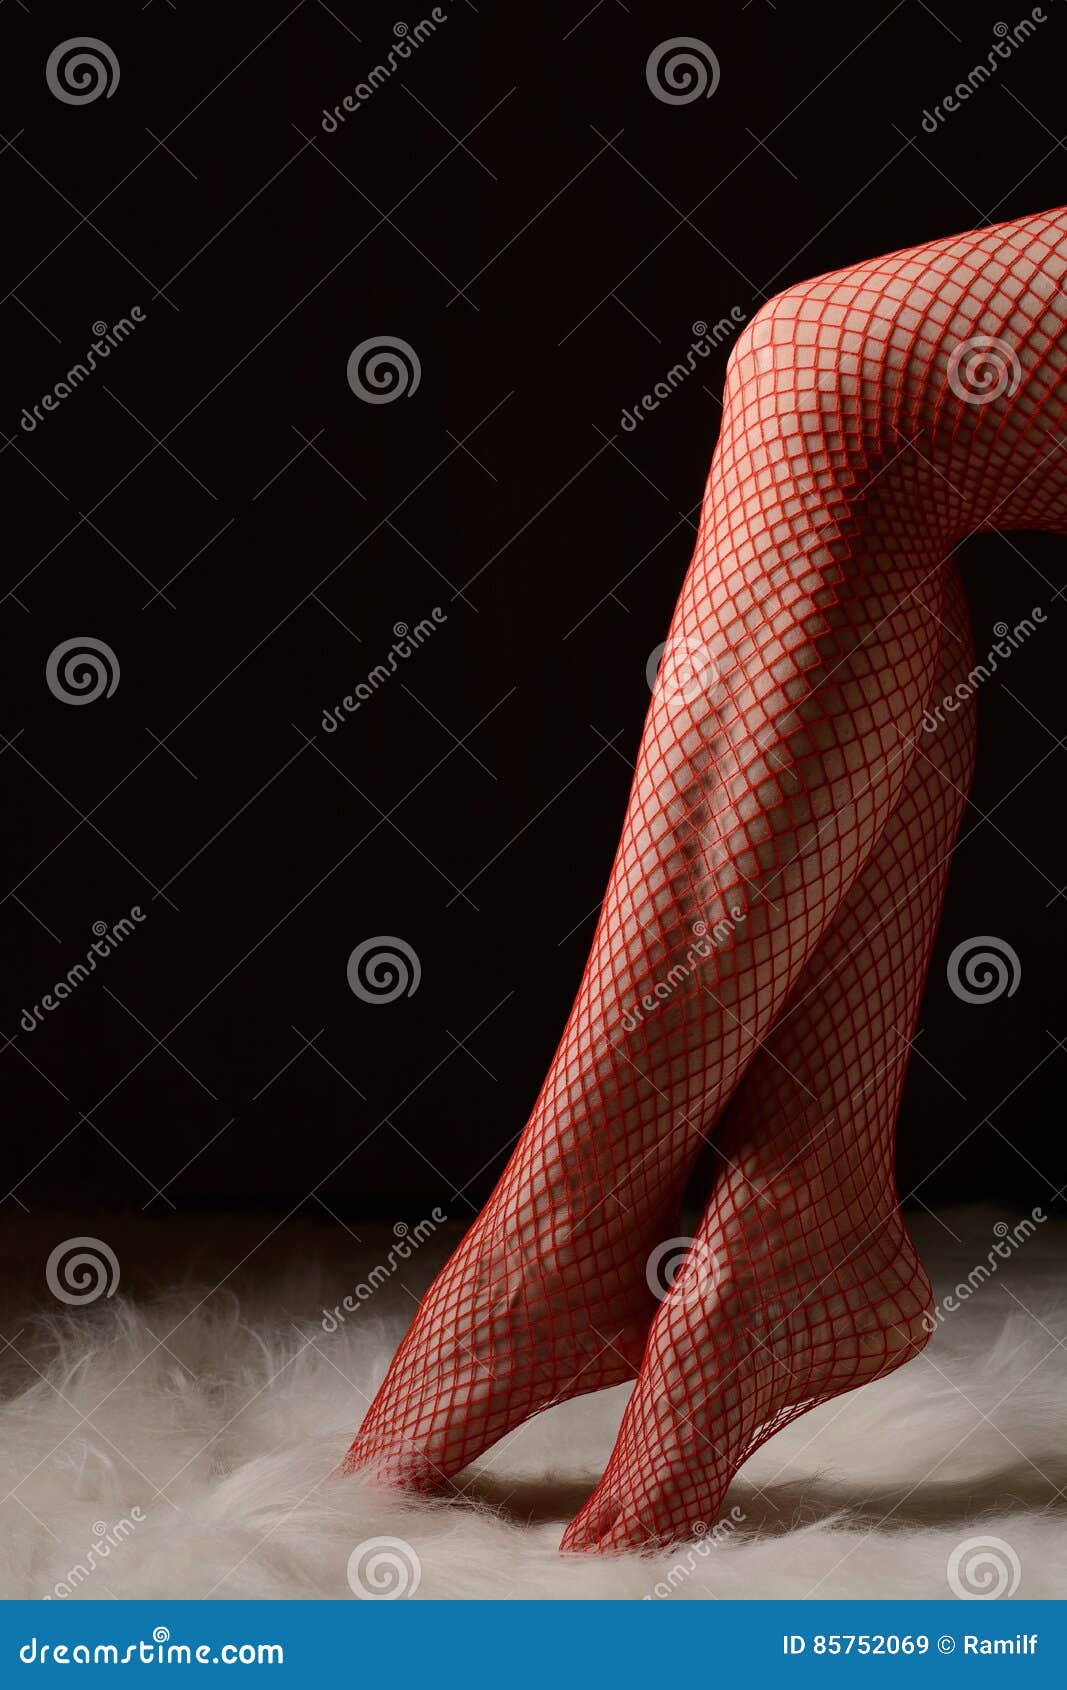 Female Feet in Red Stockings Stock Image - Image of attractive, legs:  85752069